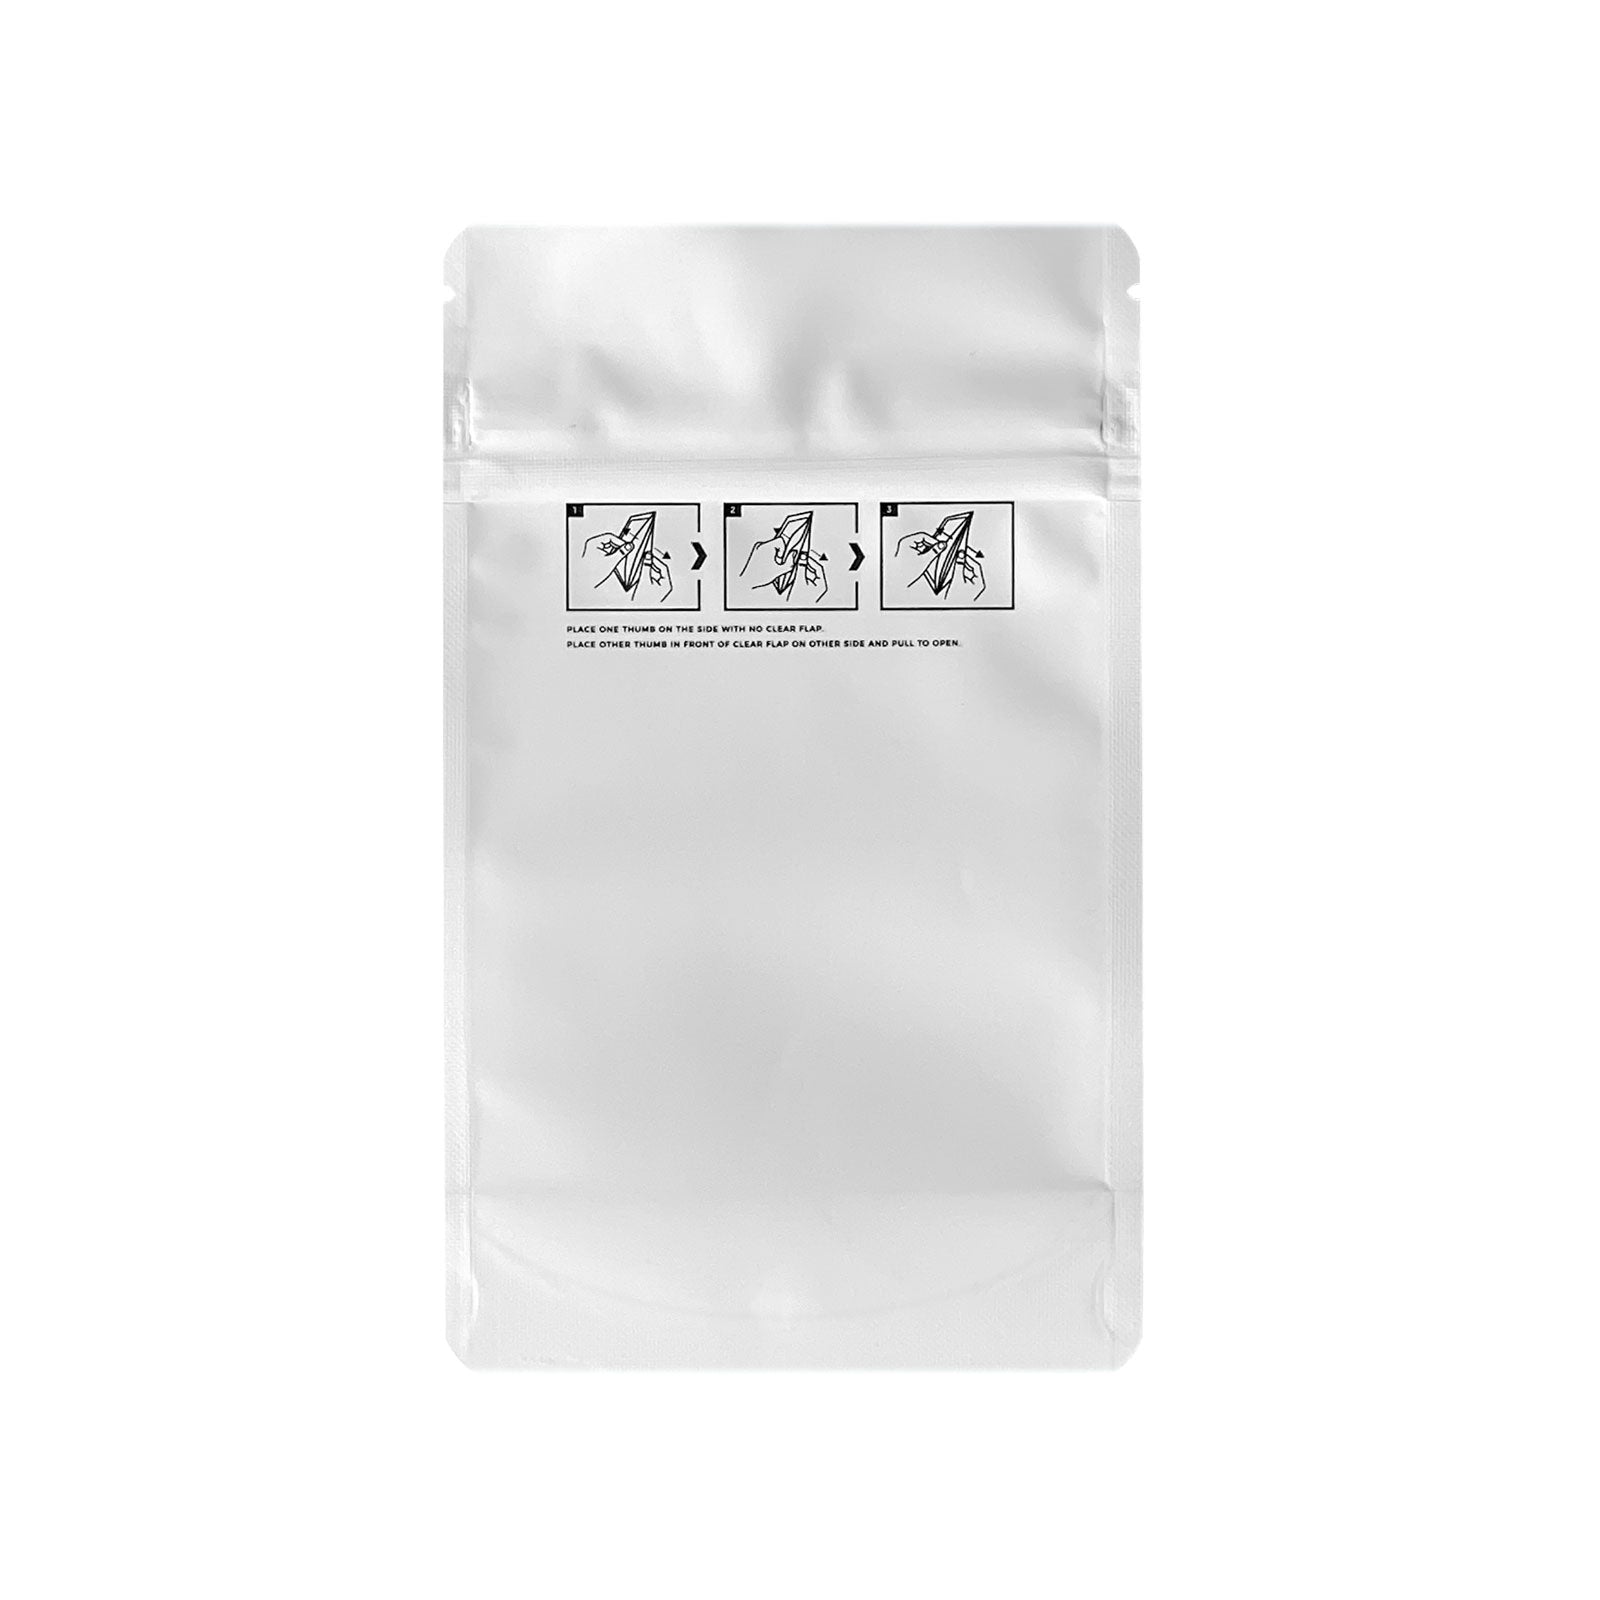 1/4 Ounce Child Resistant Bags All White 4"x6.5"+2" - 1,000 Count